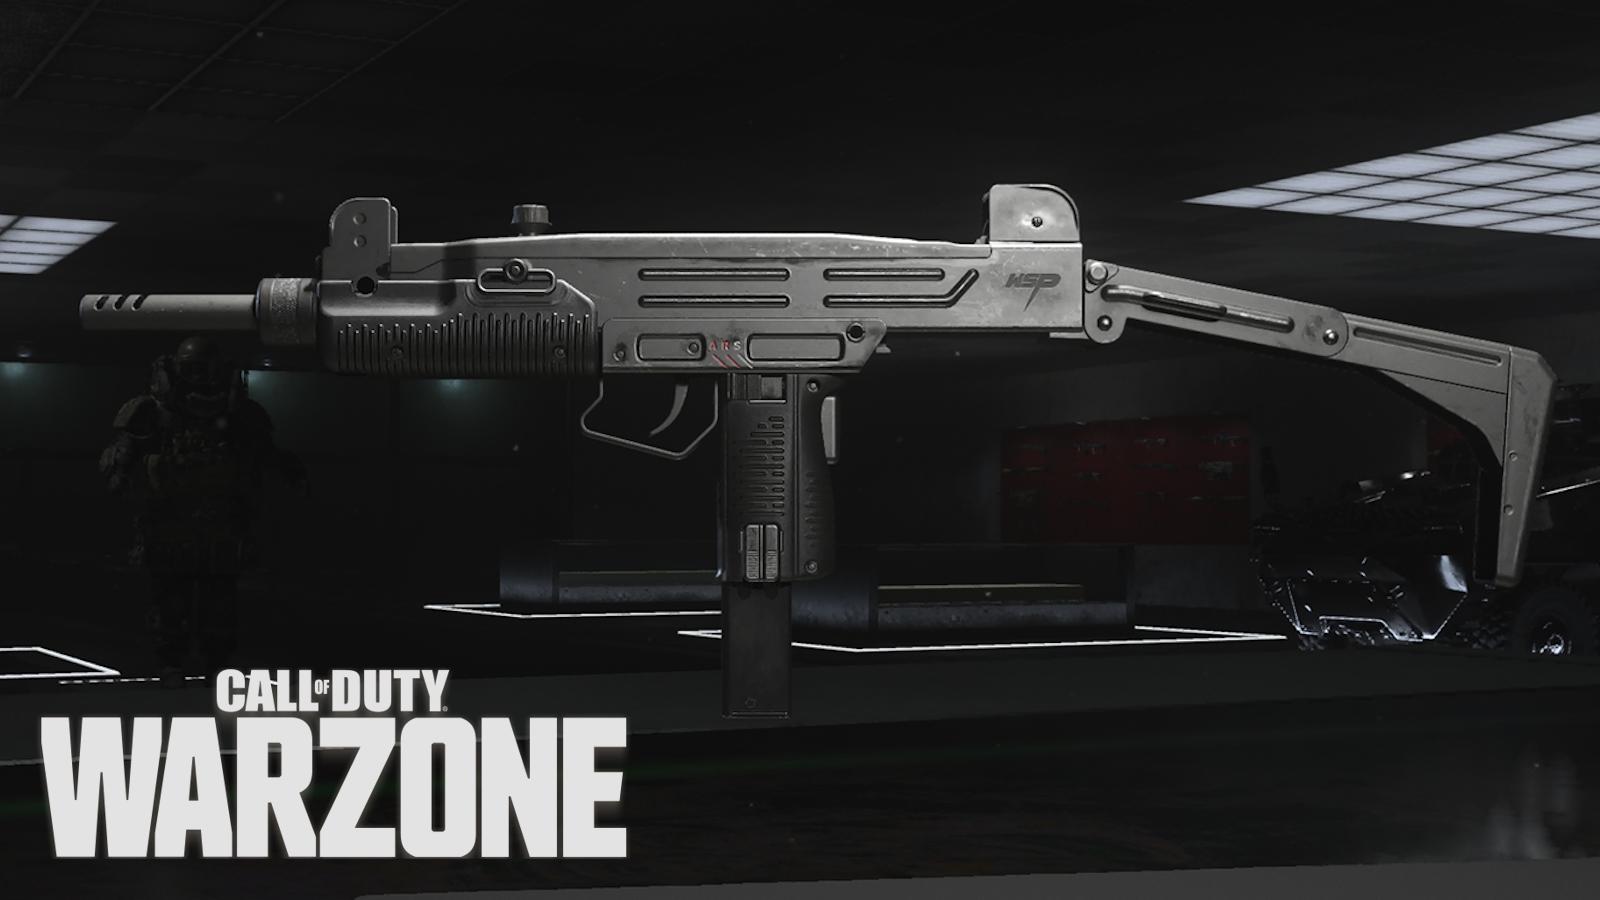 WSP-9 SMG with Warzone logo.